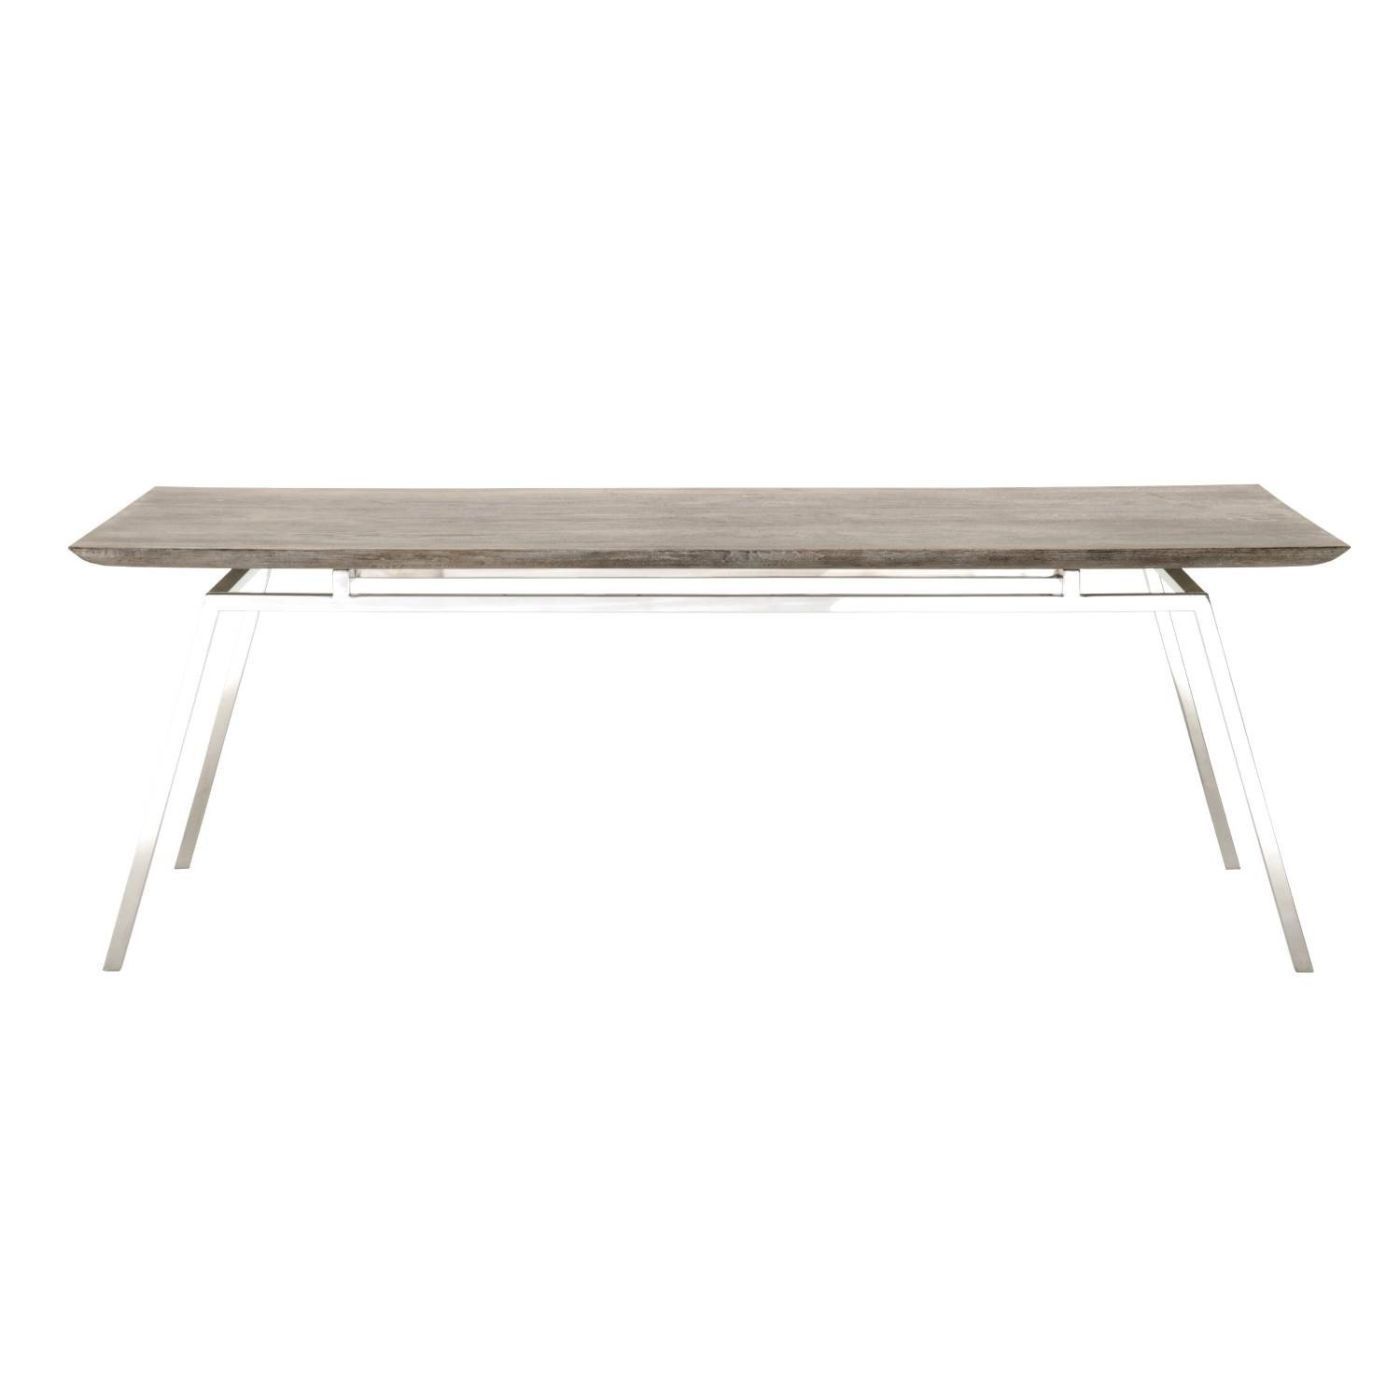 Benson Dining Table Sand Wash Oak, Stainless Steel | Stainless Steel Throughout Recent Benson Rectangle Dining Tables (View 1 of 20)